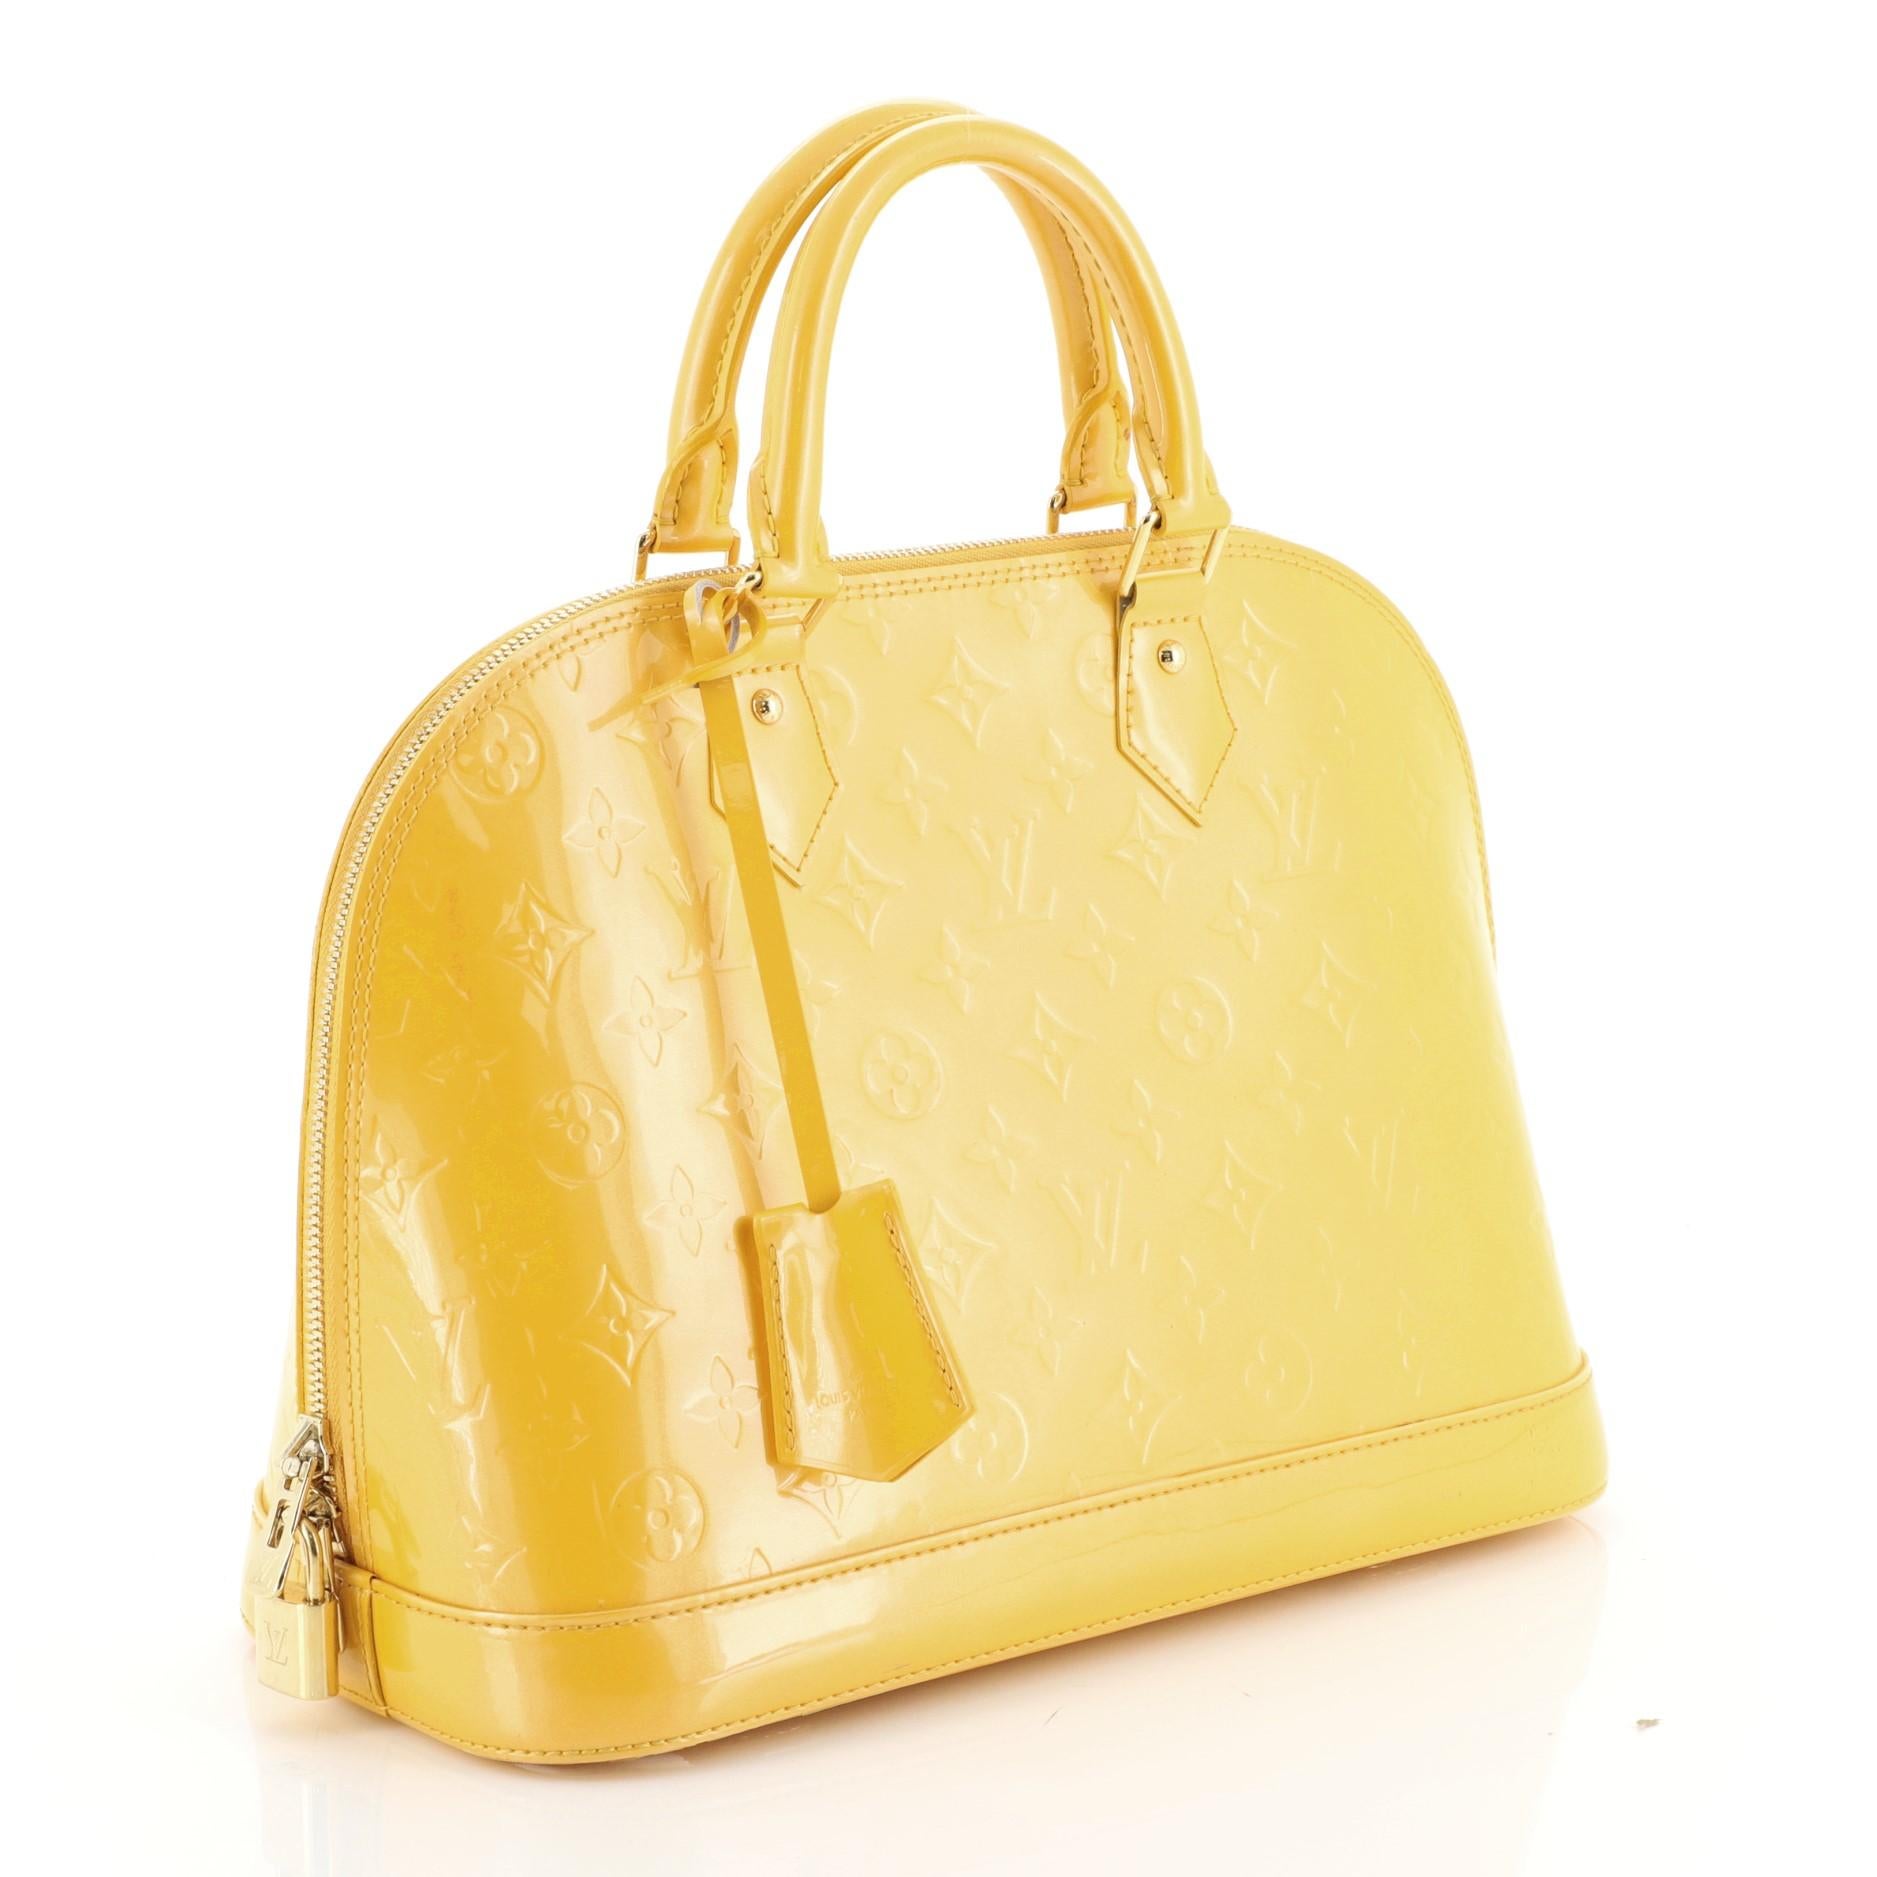 This Louis Vuitton Alma Handbag Monogram Vernis PM crafted from yellow monogram vernis leather, features dual rolled handles, protective base studs, and gold-tone hardware. Its zip closure opens to a yellow fabric interior with slip pockets.